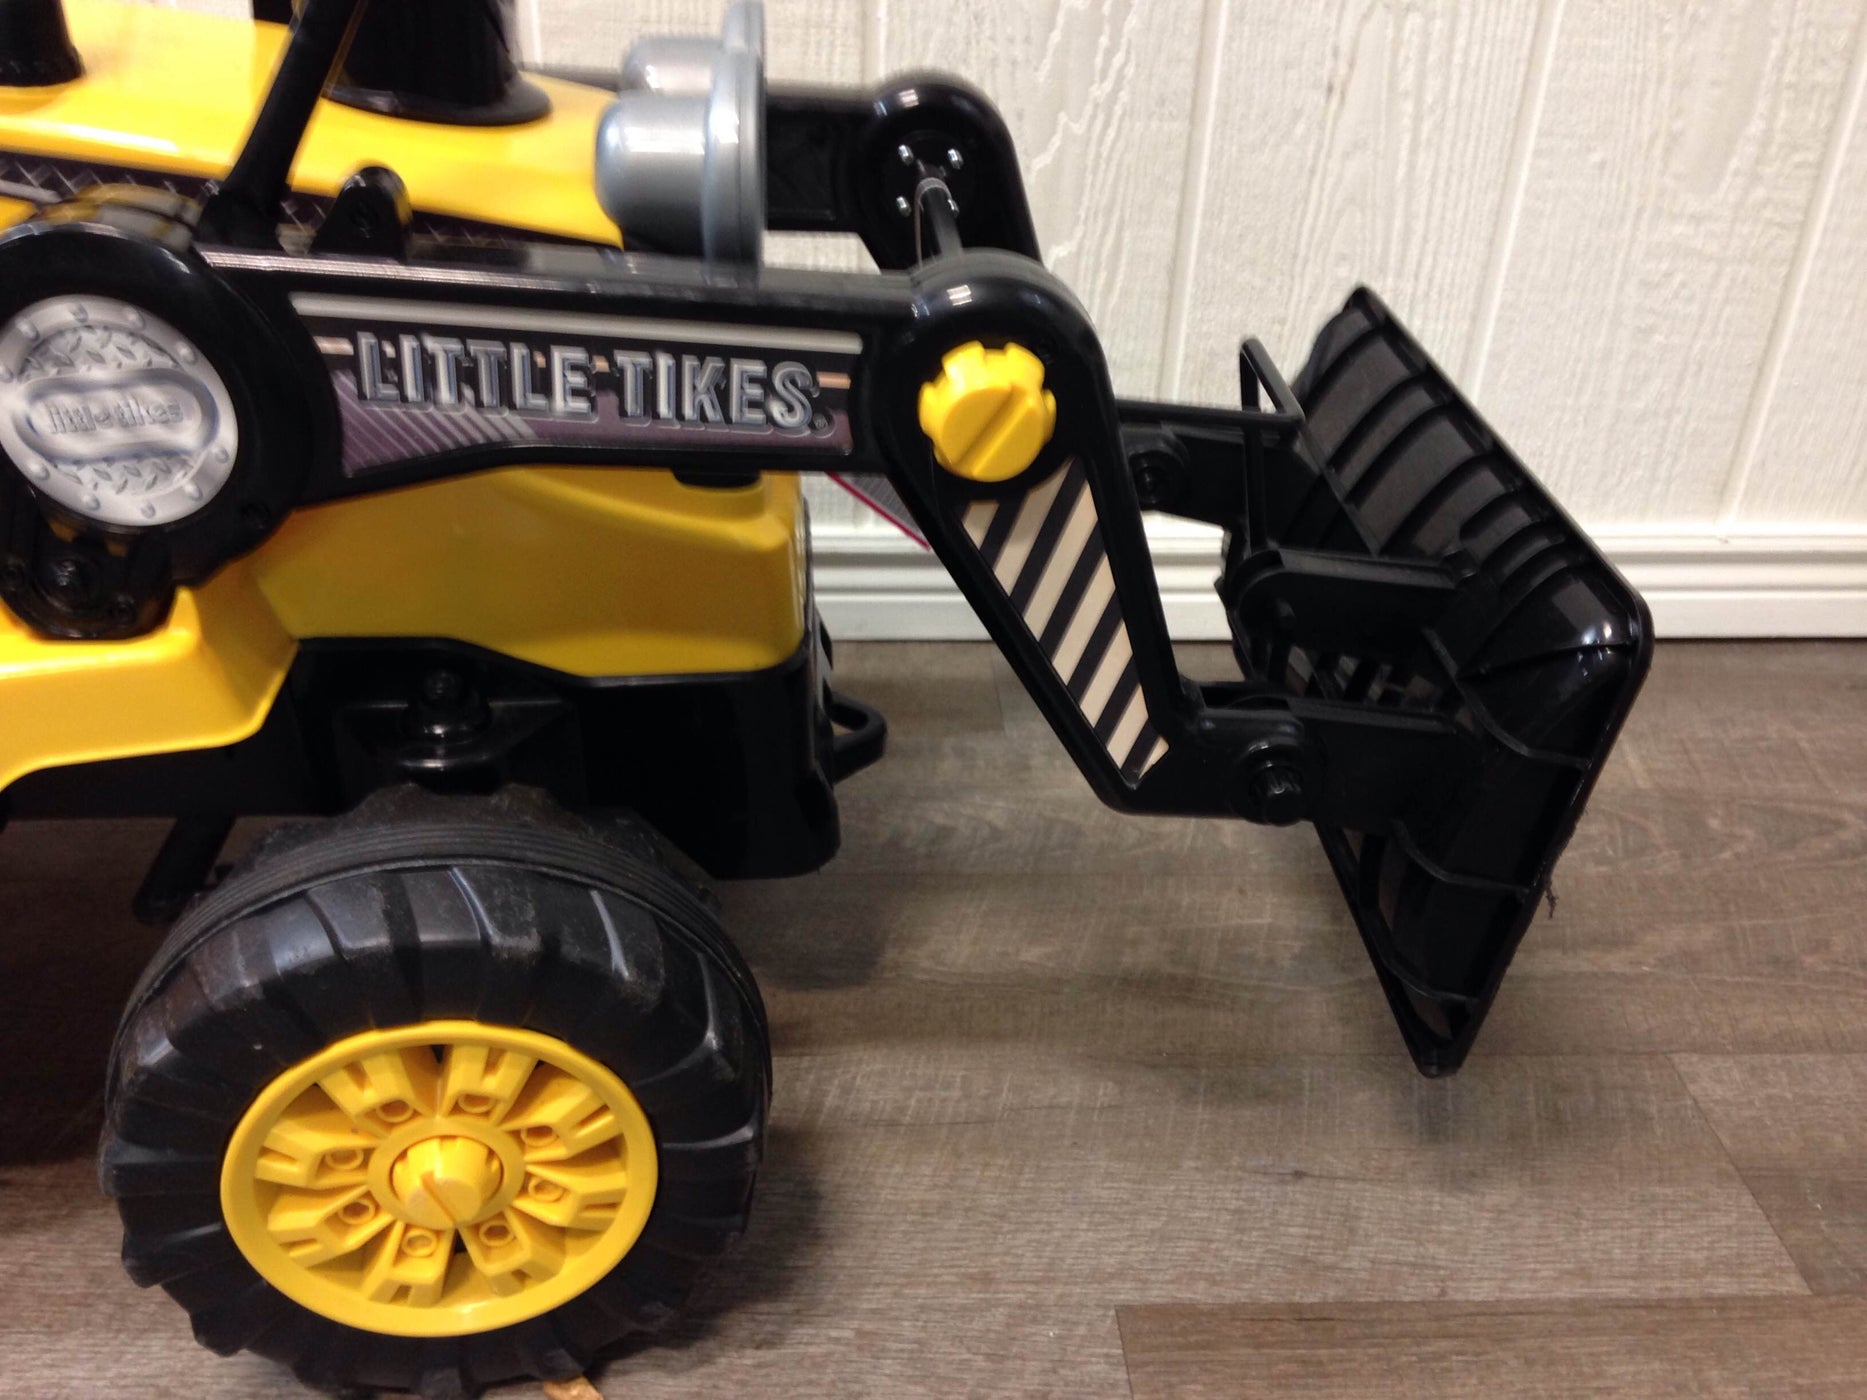 little tikes cozy powered dirt digger